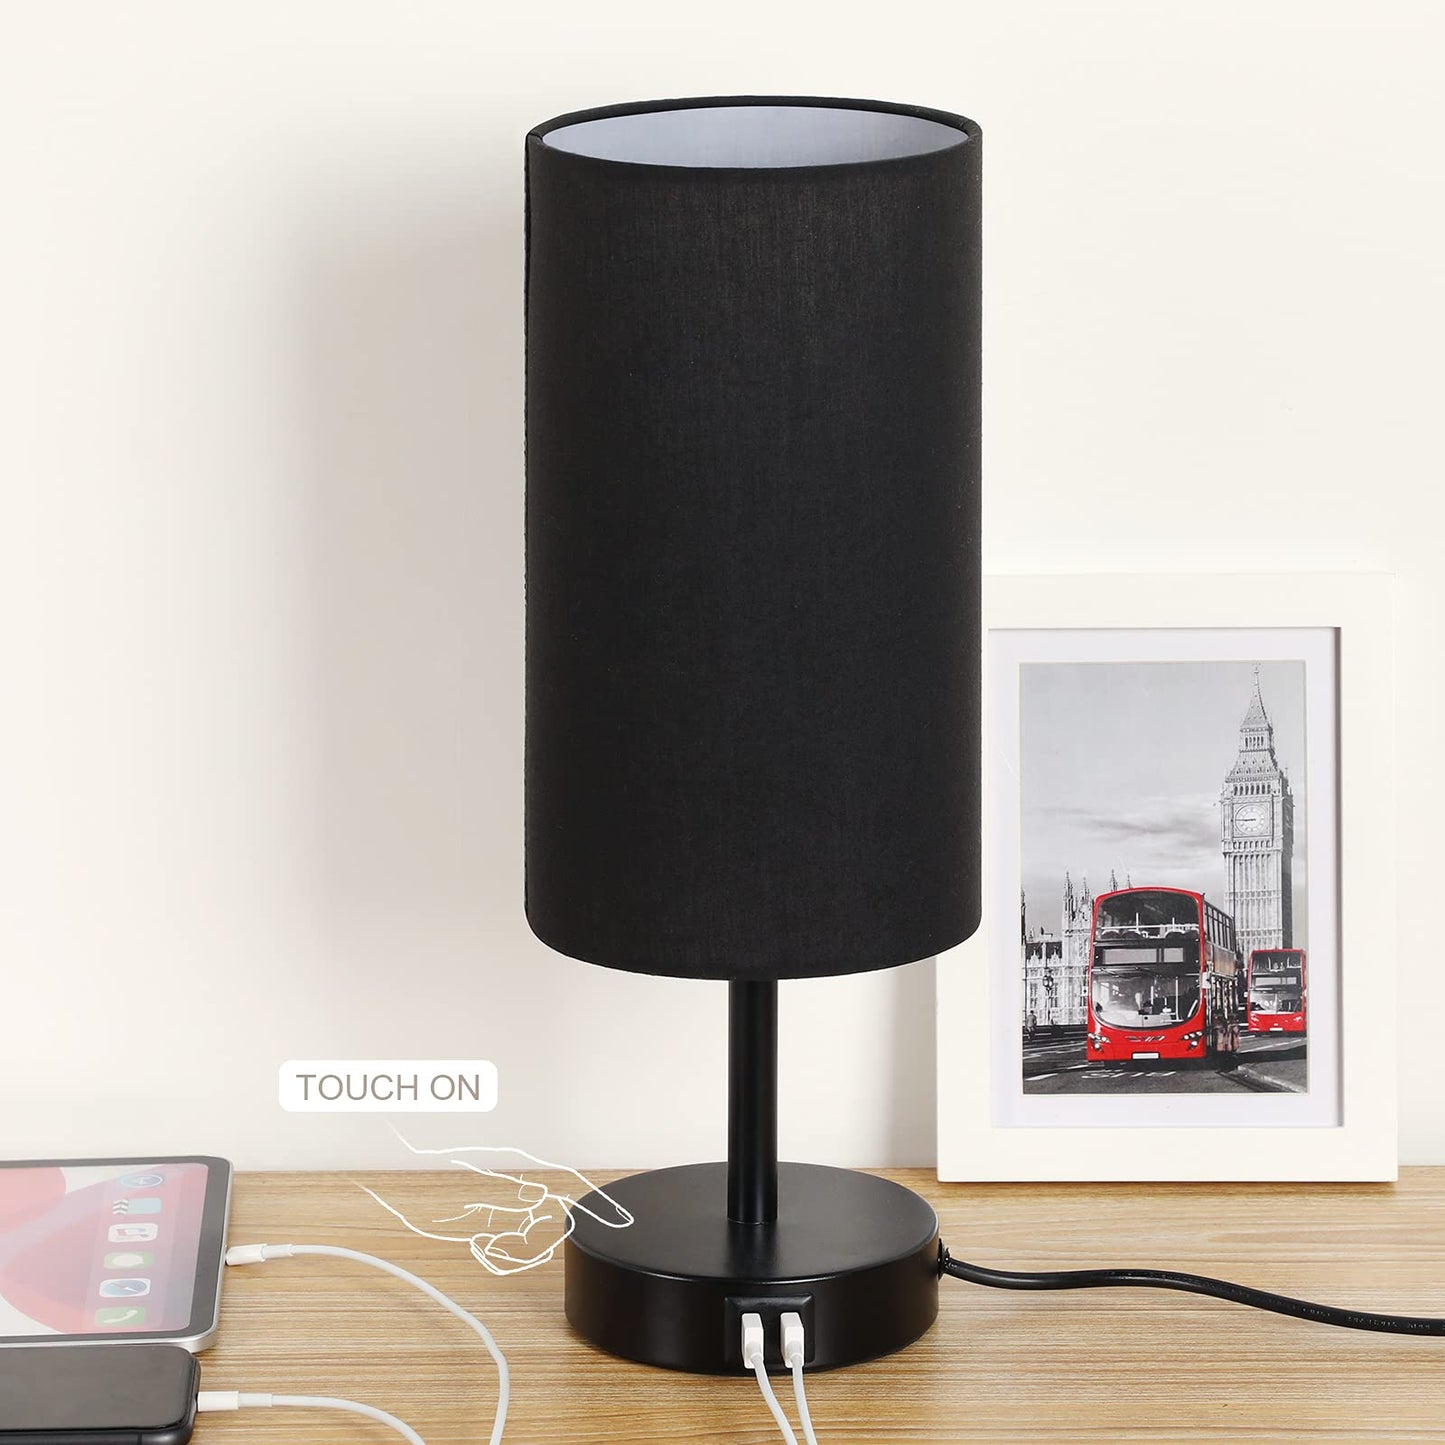 DESOUTILS LED Touch Table Lamp - Create a perfect ambiance in your bedroom